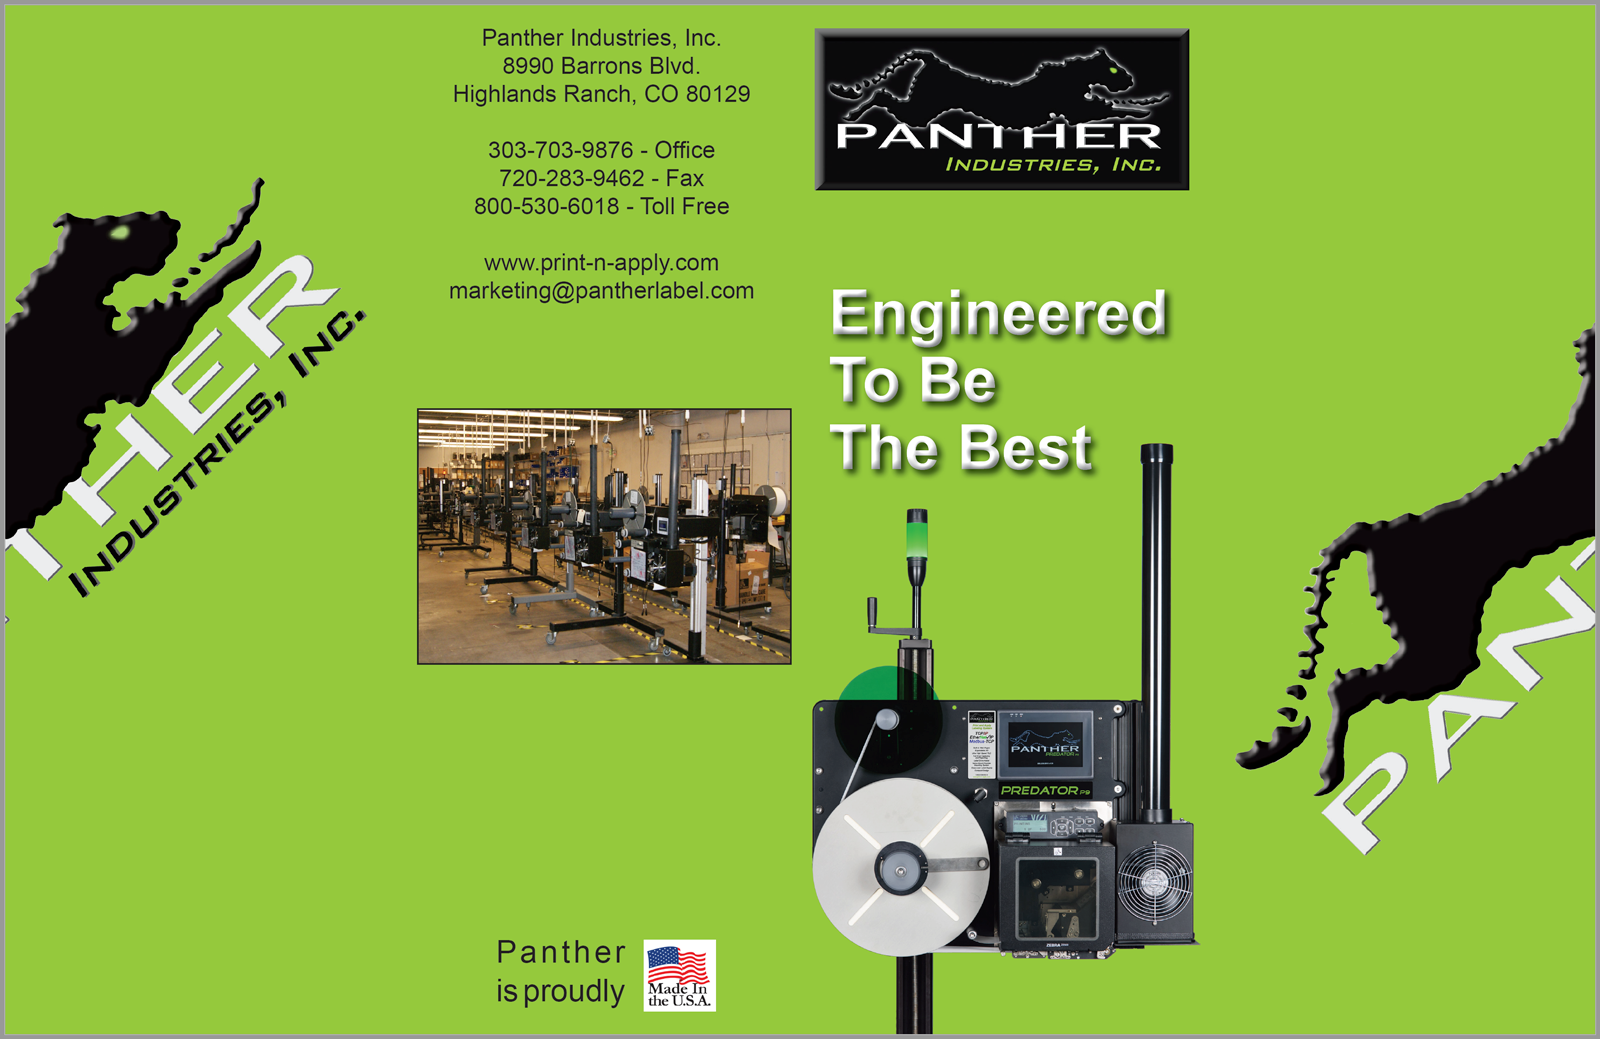 Panther Industries 4-Page Company Brochure